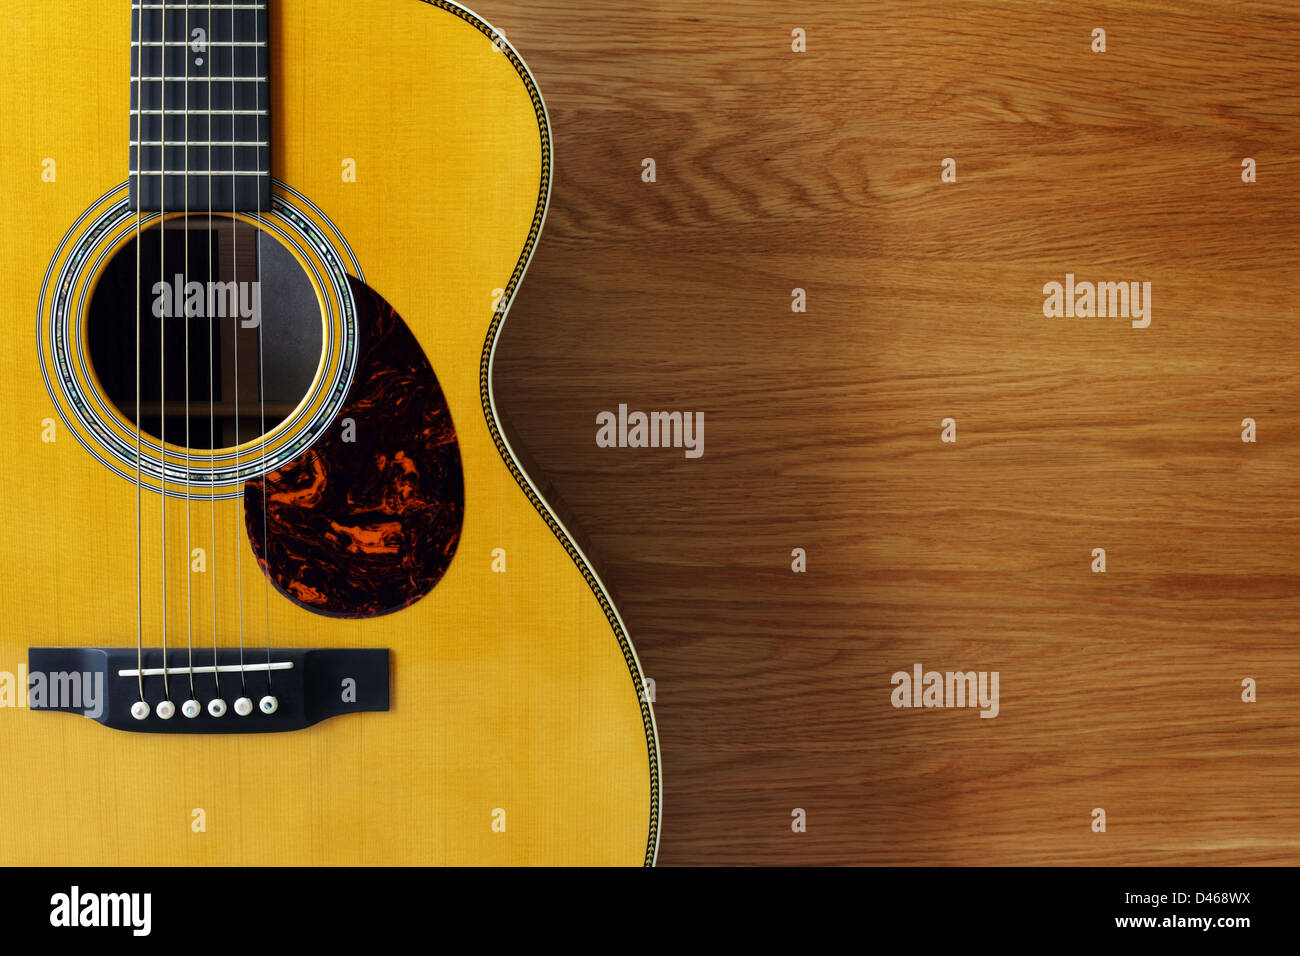 Guitar and wood background Stock Photo